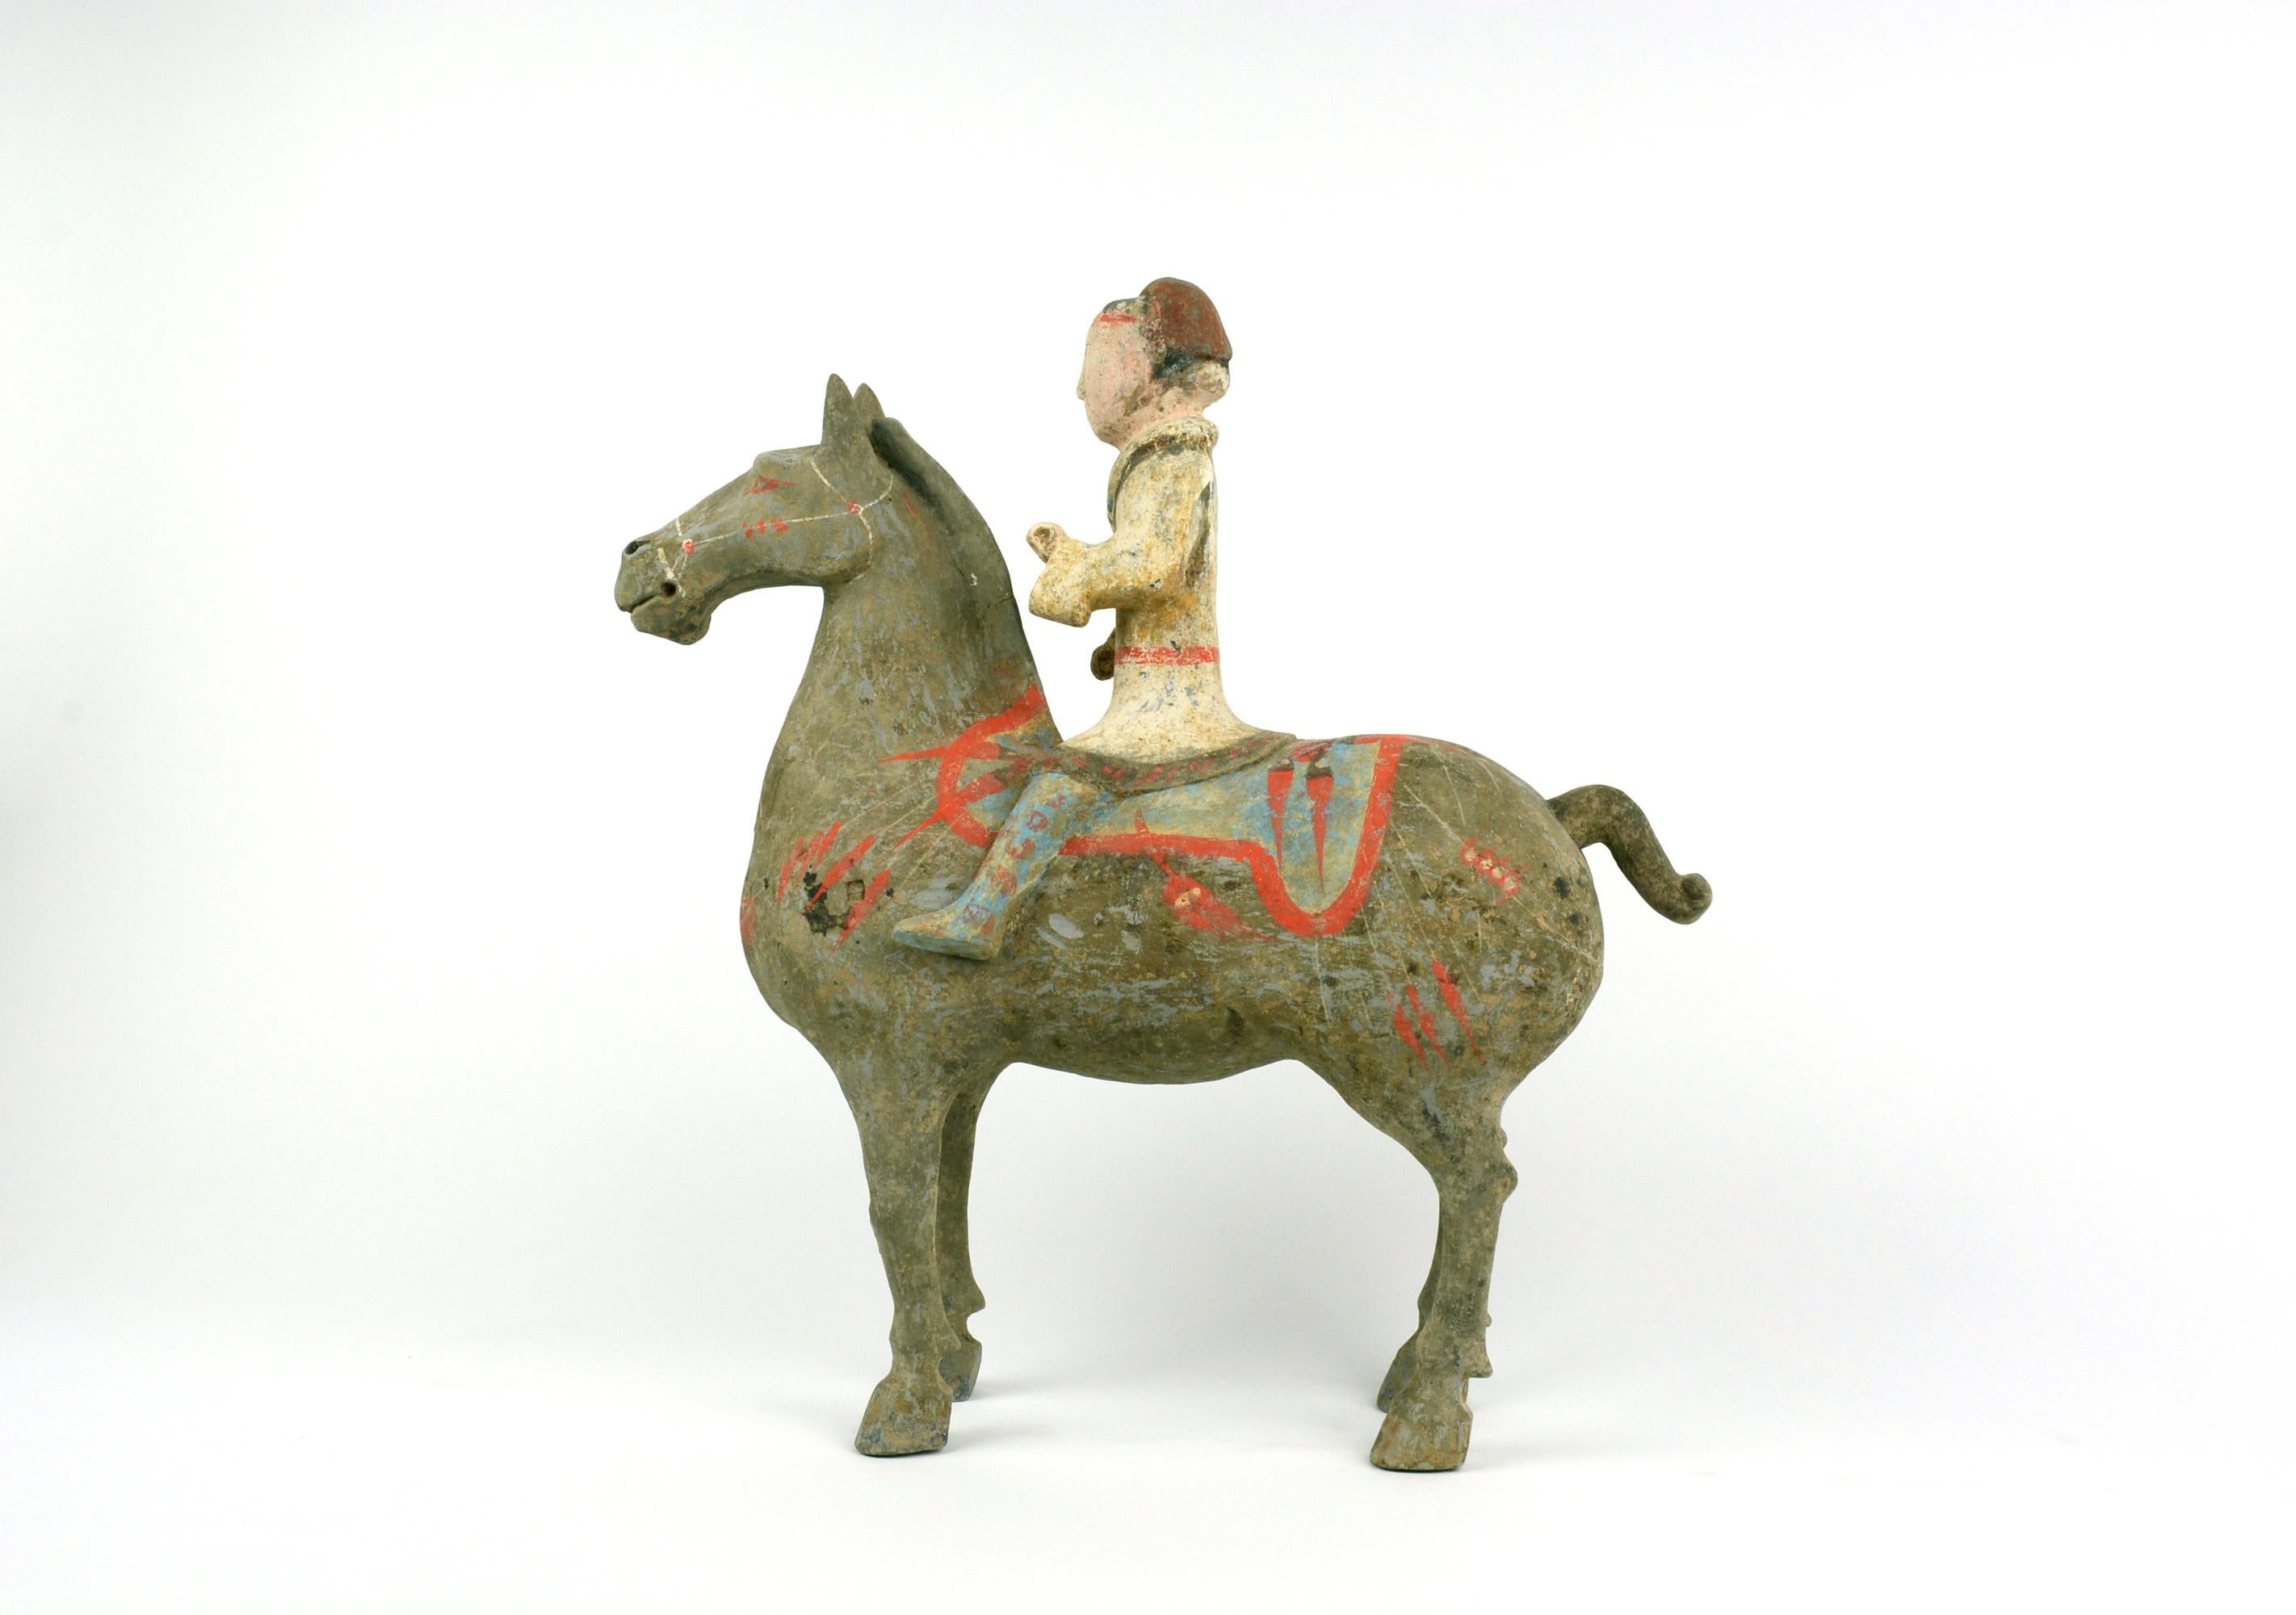 Han Equestrian 12H.
This equestrian represents the standard of Western Han equestrian found in Yang Jiawan of Xian. The technique of making includes molding, engraving and cold painting. The terracotta piece was first molded and the details were